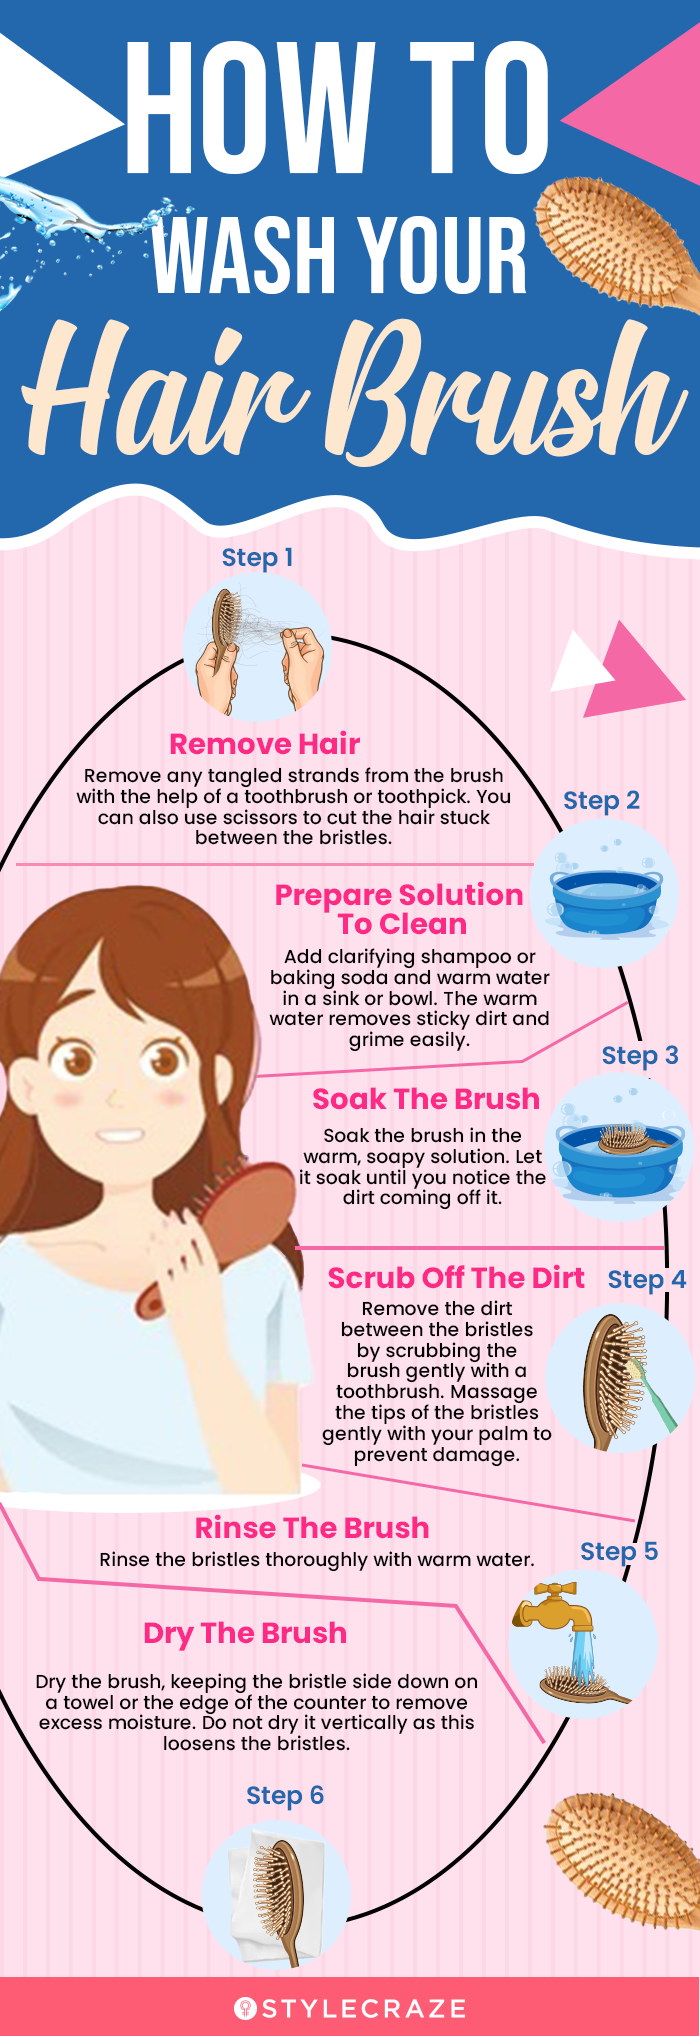 https://www.stylecraze.com/wp-content/uploads/2020/11/How-To-Wash-Your-Hair-Brush.png